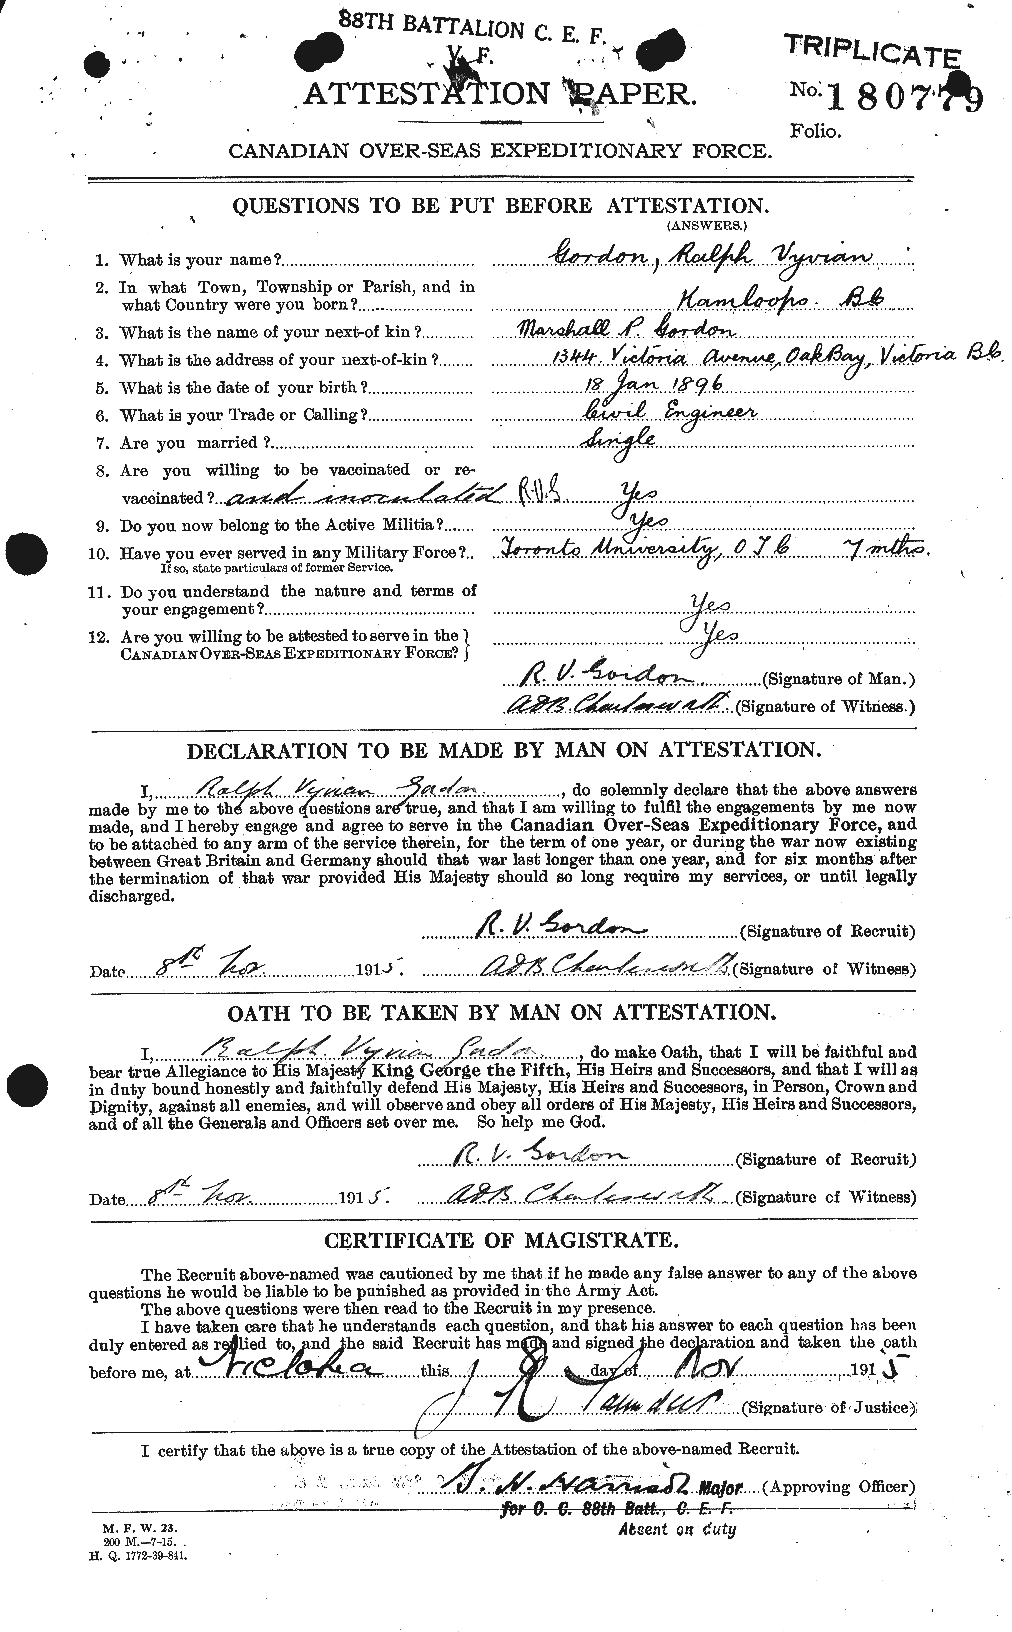 Personnel Records of the First World War - CEF 355914a